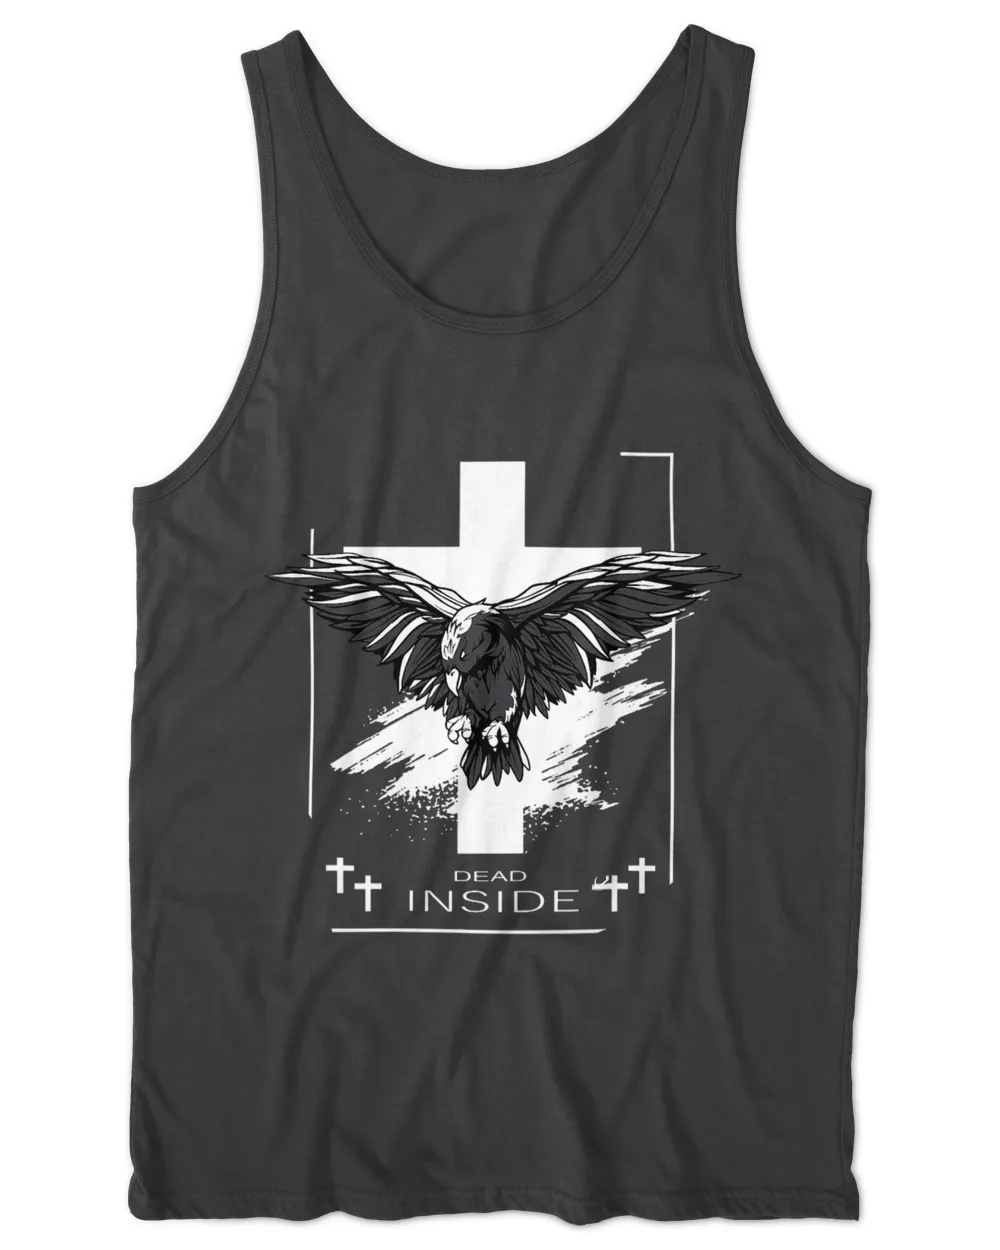 Dead Inside Black Crow With Cross Aesthetic Gothic Occult